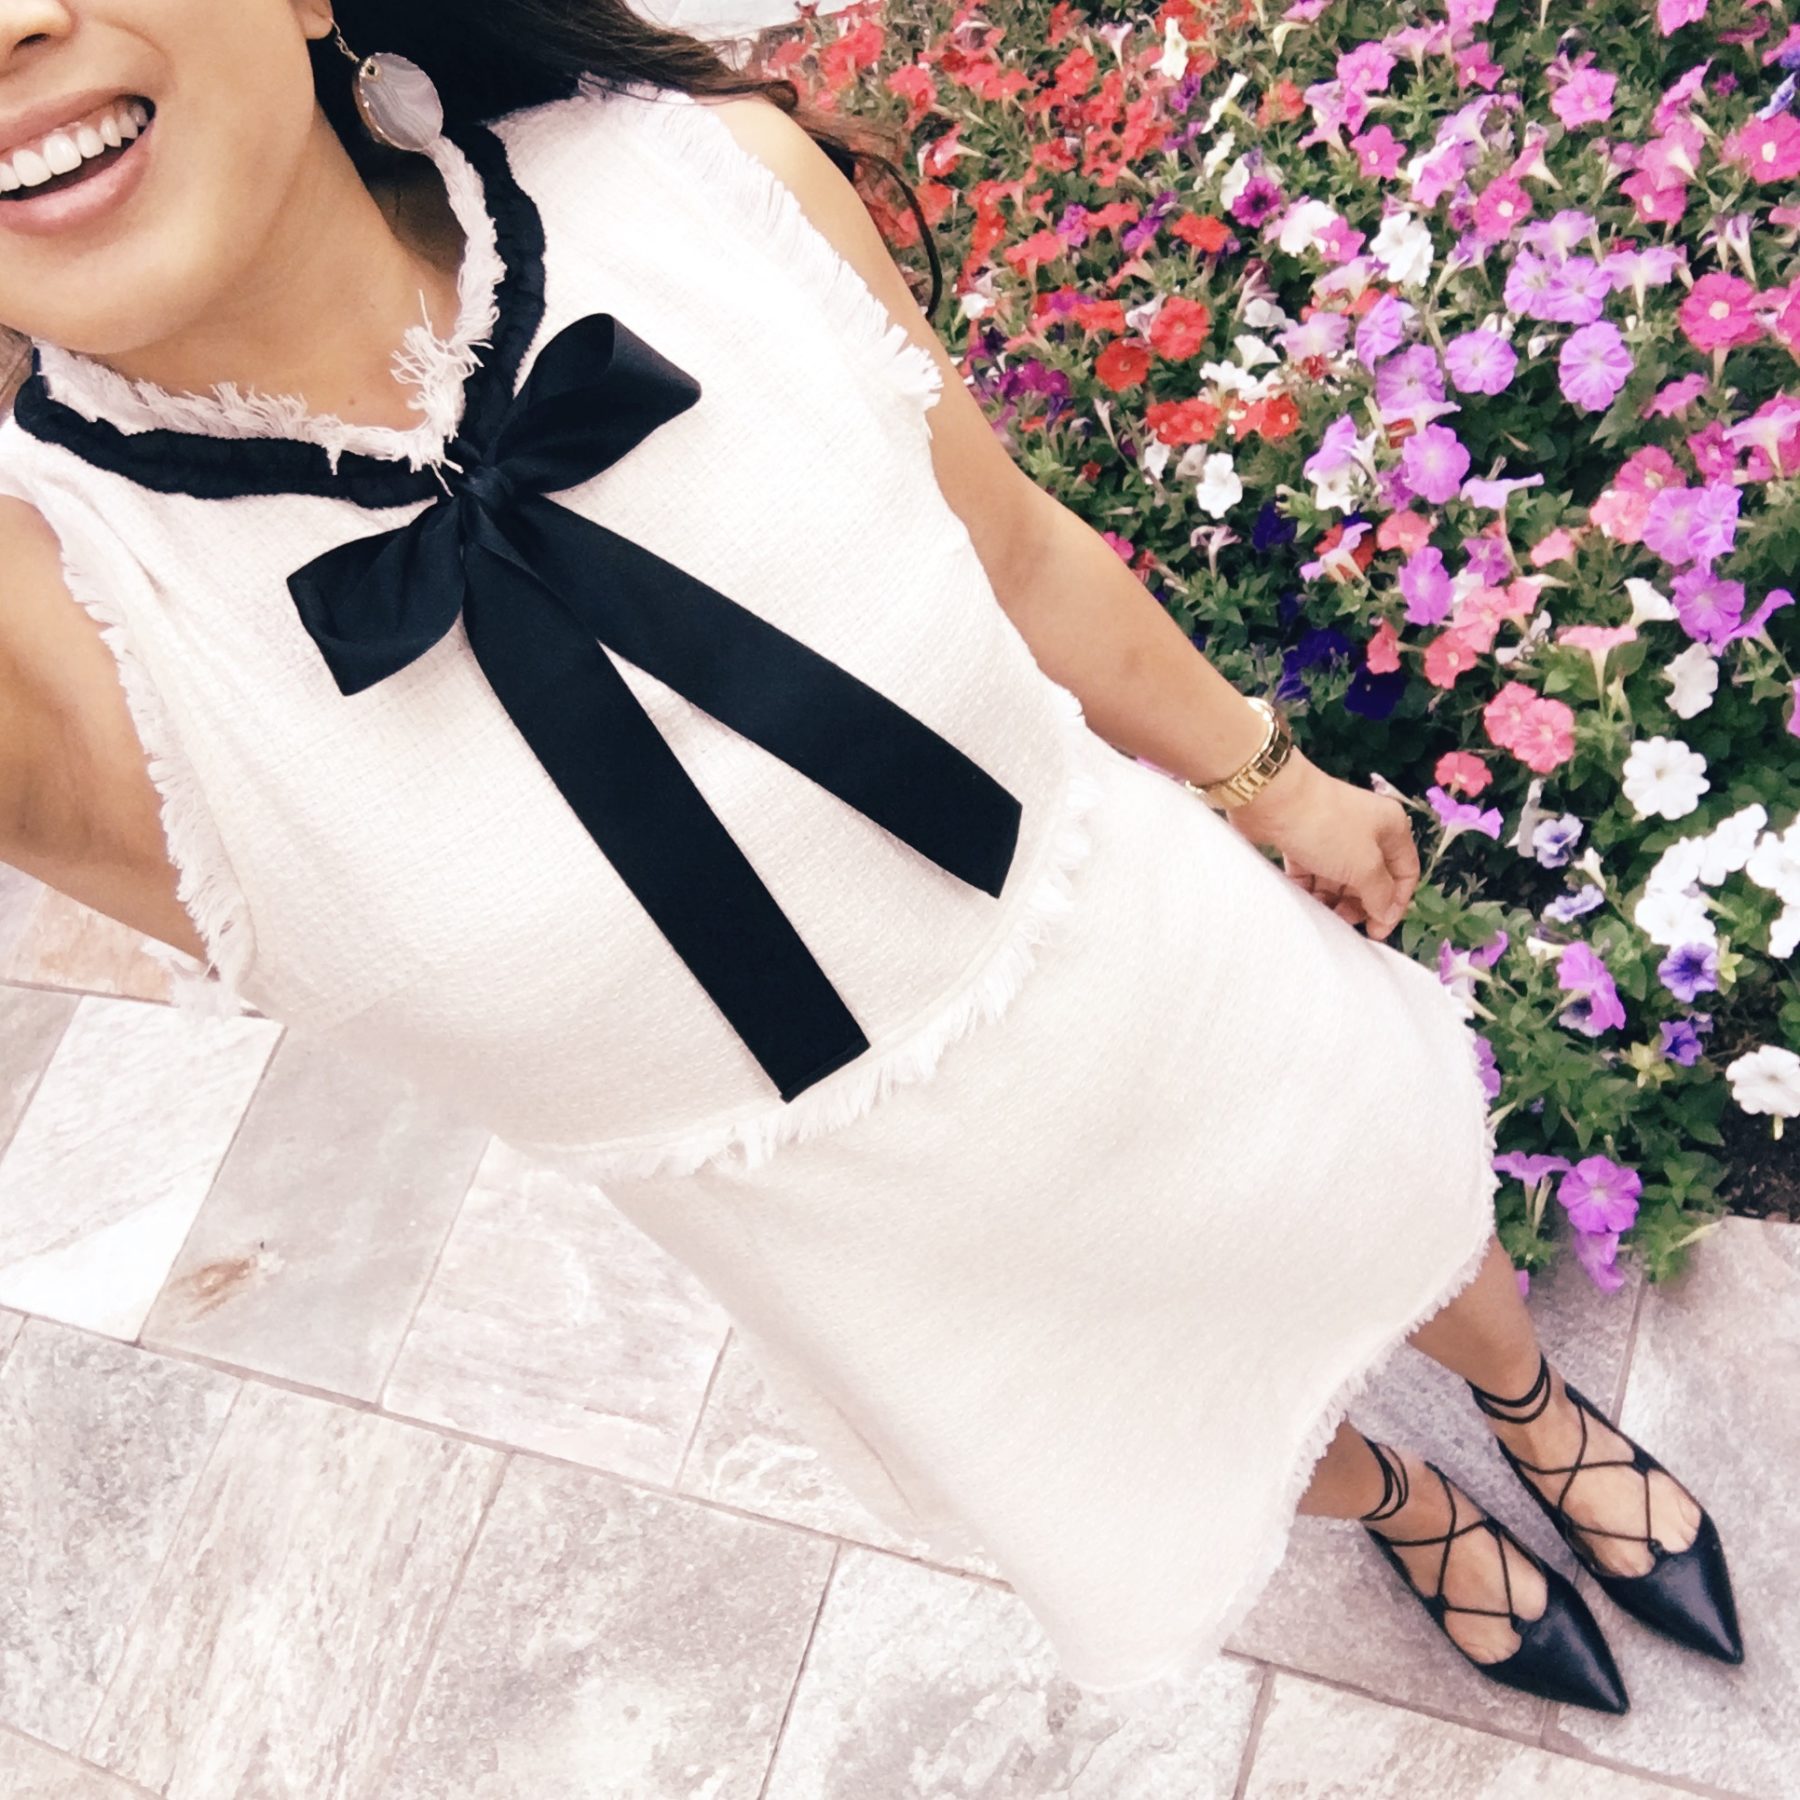 cute & little | petite fashion blog | white black bow tweed dress, lace-up flats | date night outfit - Instagram Fashion Roundup featured by popular Dallas petite fashion blogger, Cute & Little